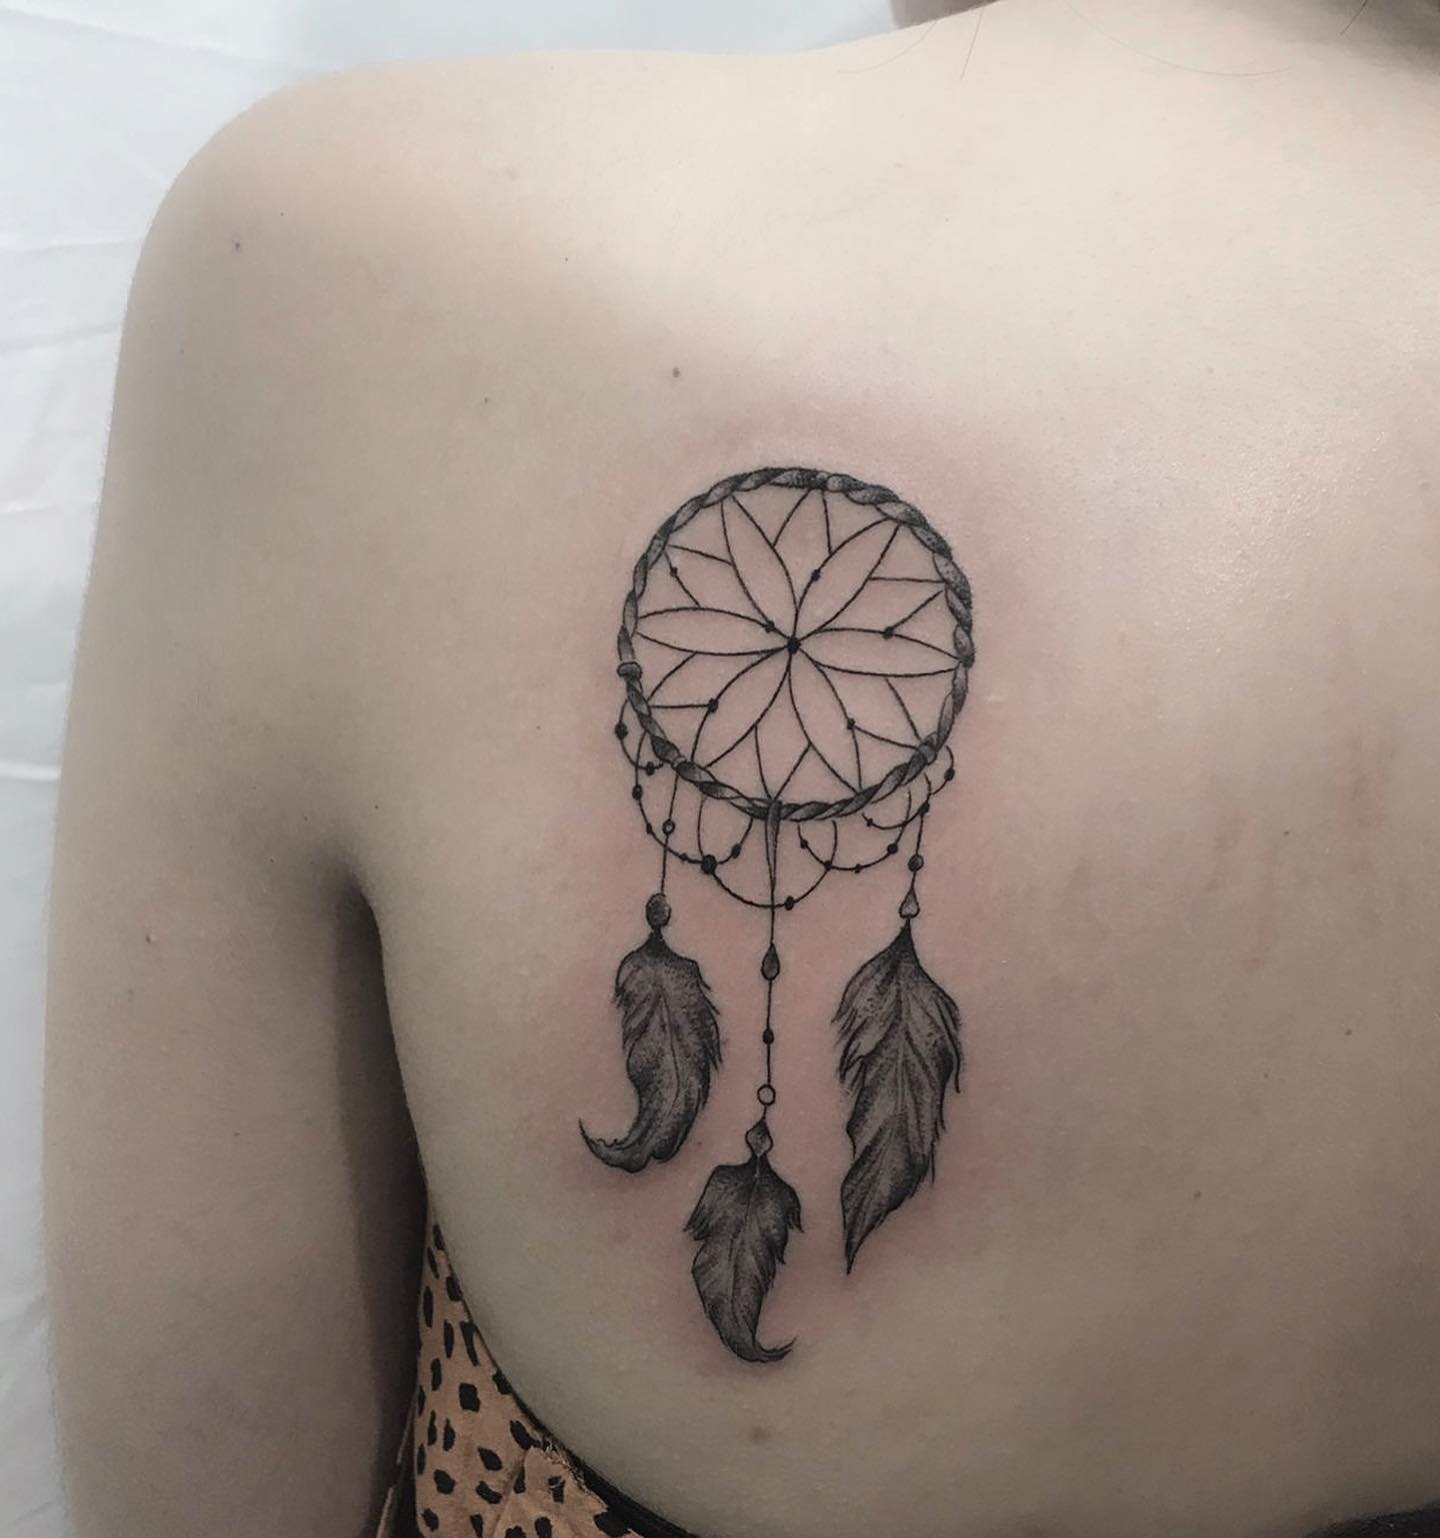 These days, you'll see people wearing dream catchers as jewelry or hanging them in their homes as artwork. The only way to take this object to the next level is with a tattoo! A plain dream catcher tattoo on your back will rock.